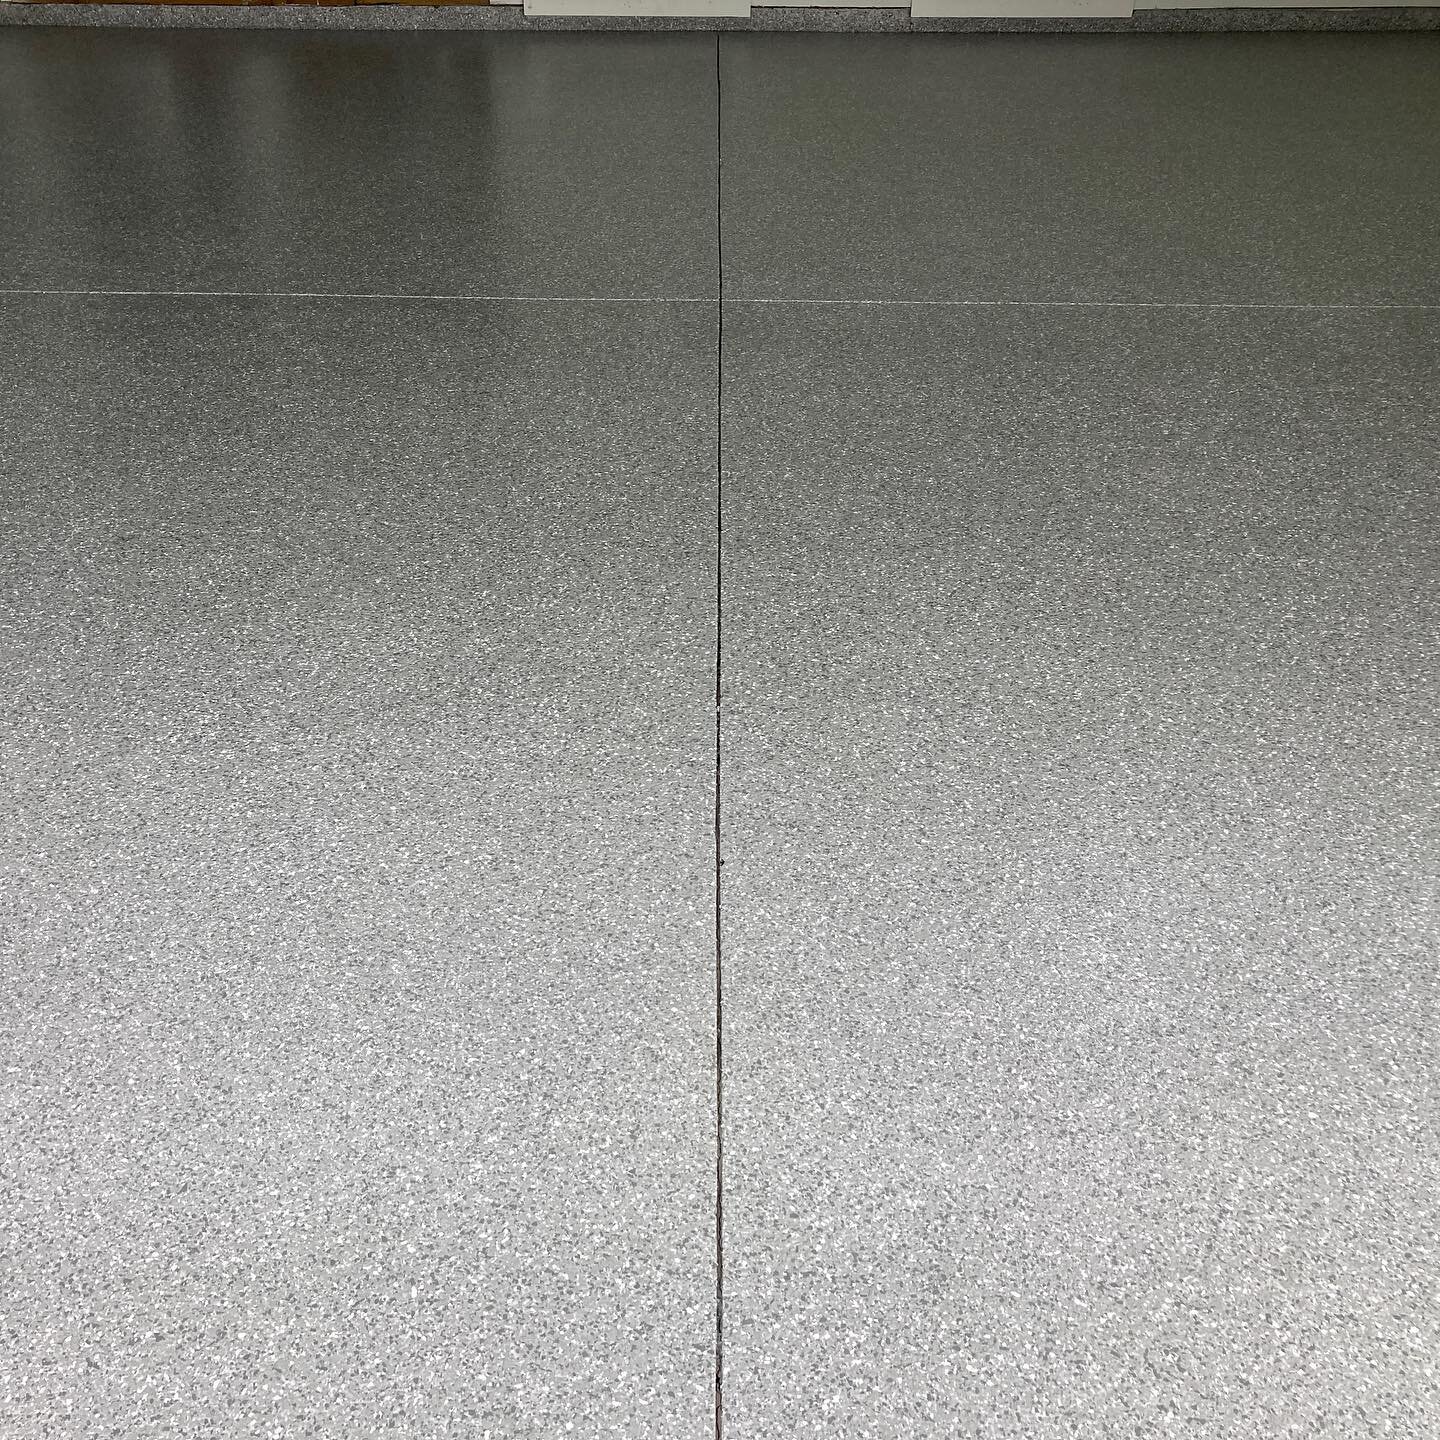 👀That&rsquo;s clean!

🏠 New construction calls for new epoxy floors!

💪Duarable
🧼Easy to clean
💯Always fresh

👉Flake Epoxy System✨
👉Color: Smoke💨 

New concrete or old concrete, we have a custom epoxy system for you!

📱call/text: 208-402-838